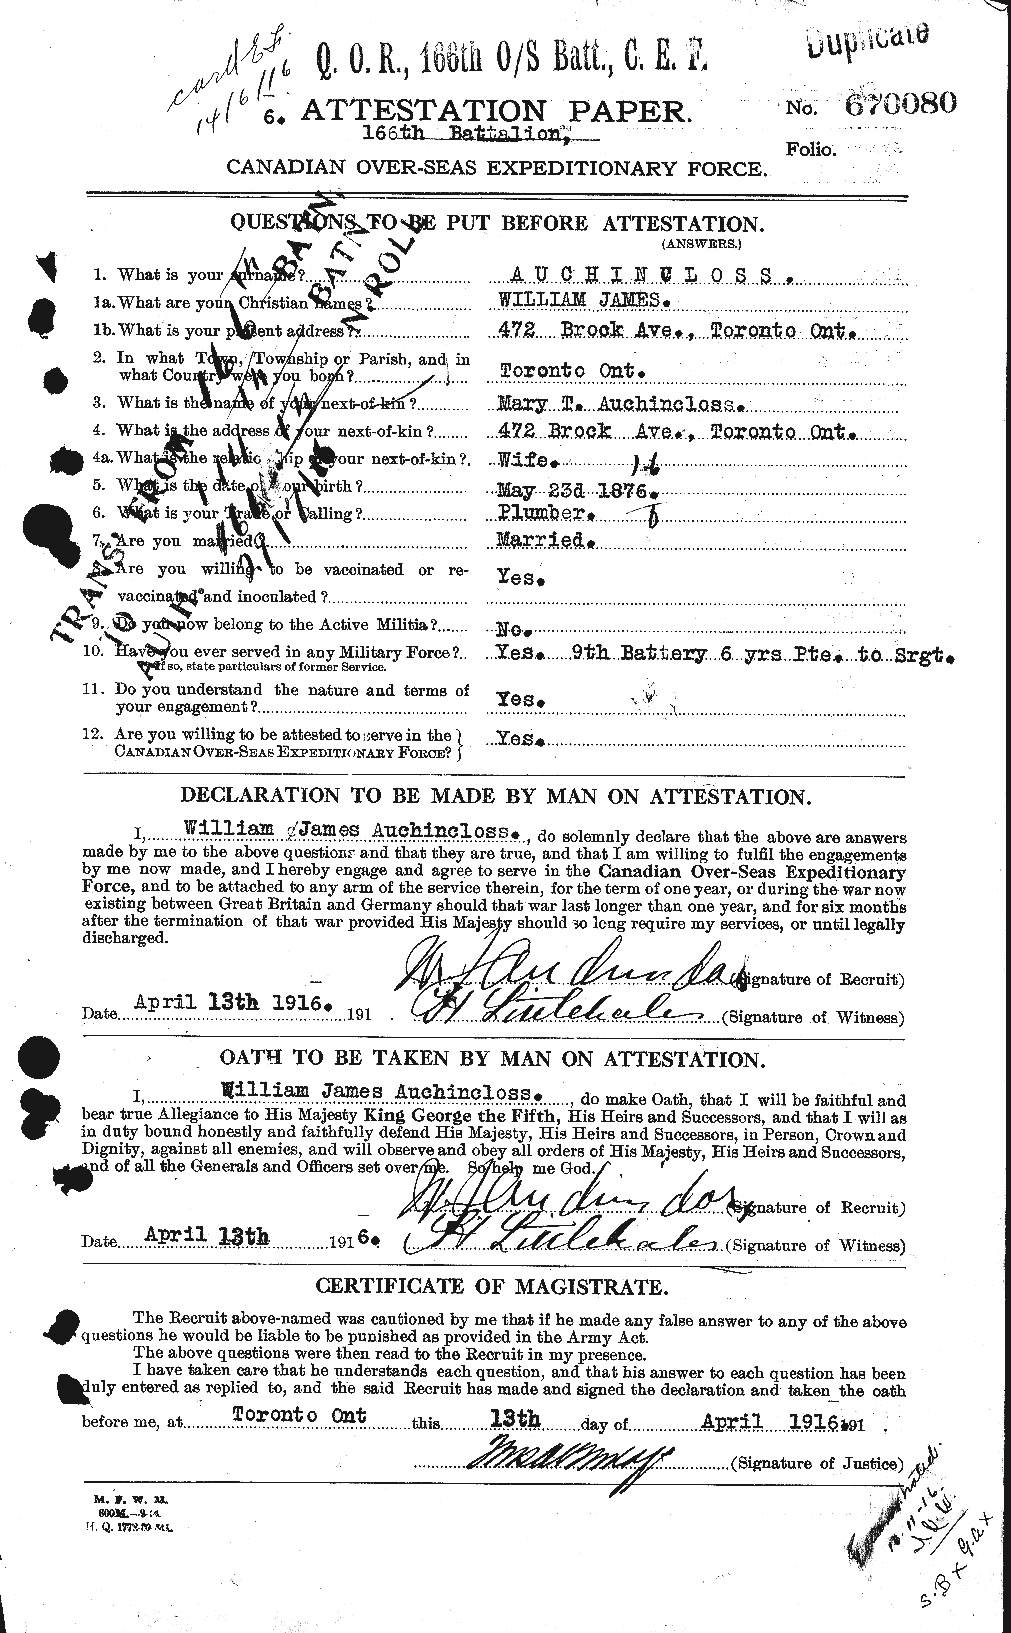 Personnel Records of the First World War - CEF 224610a